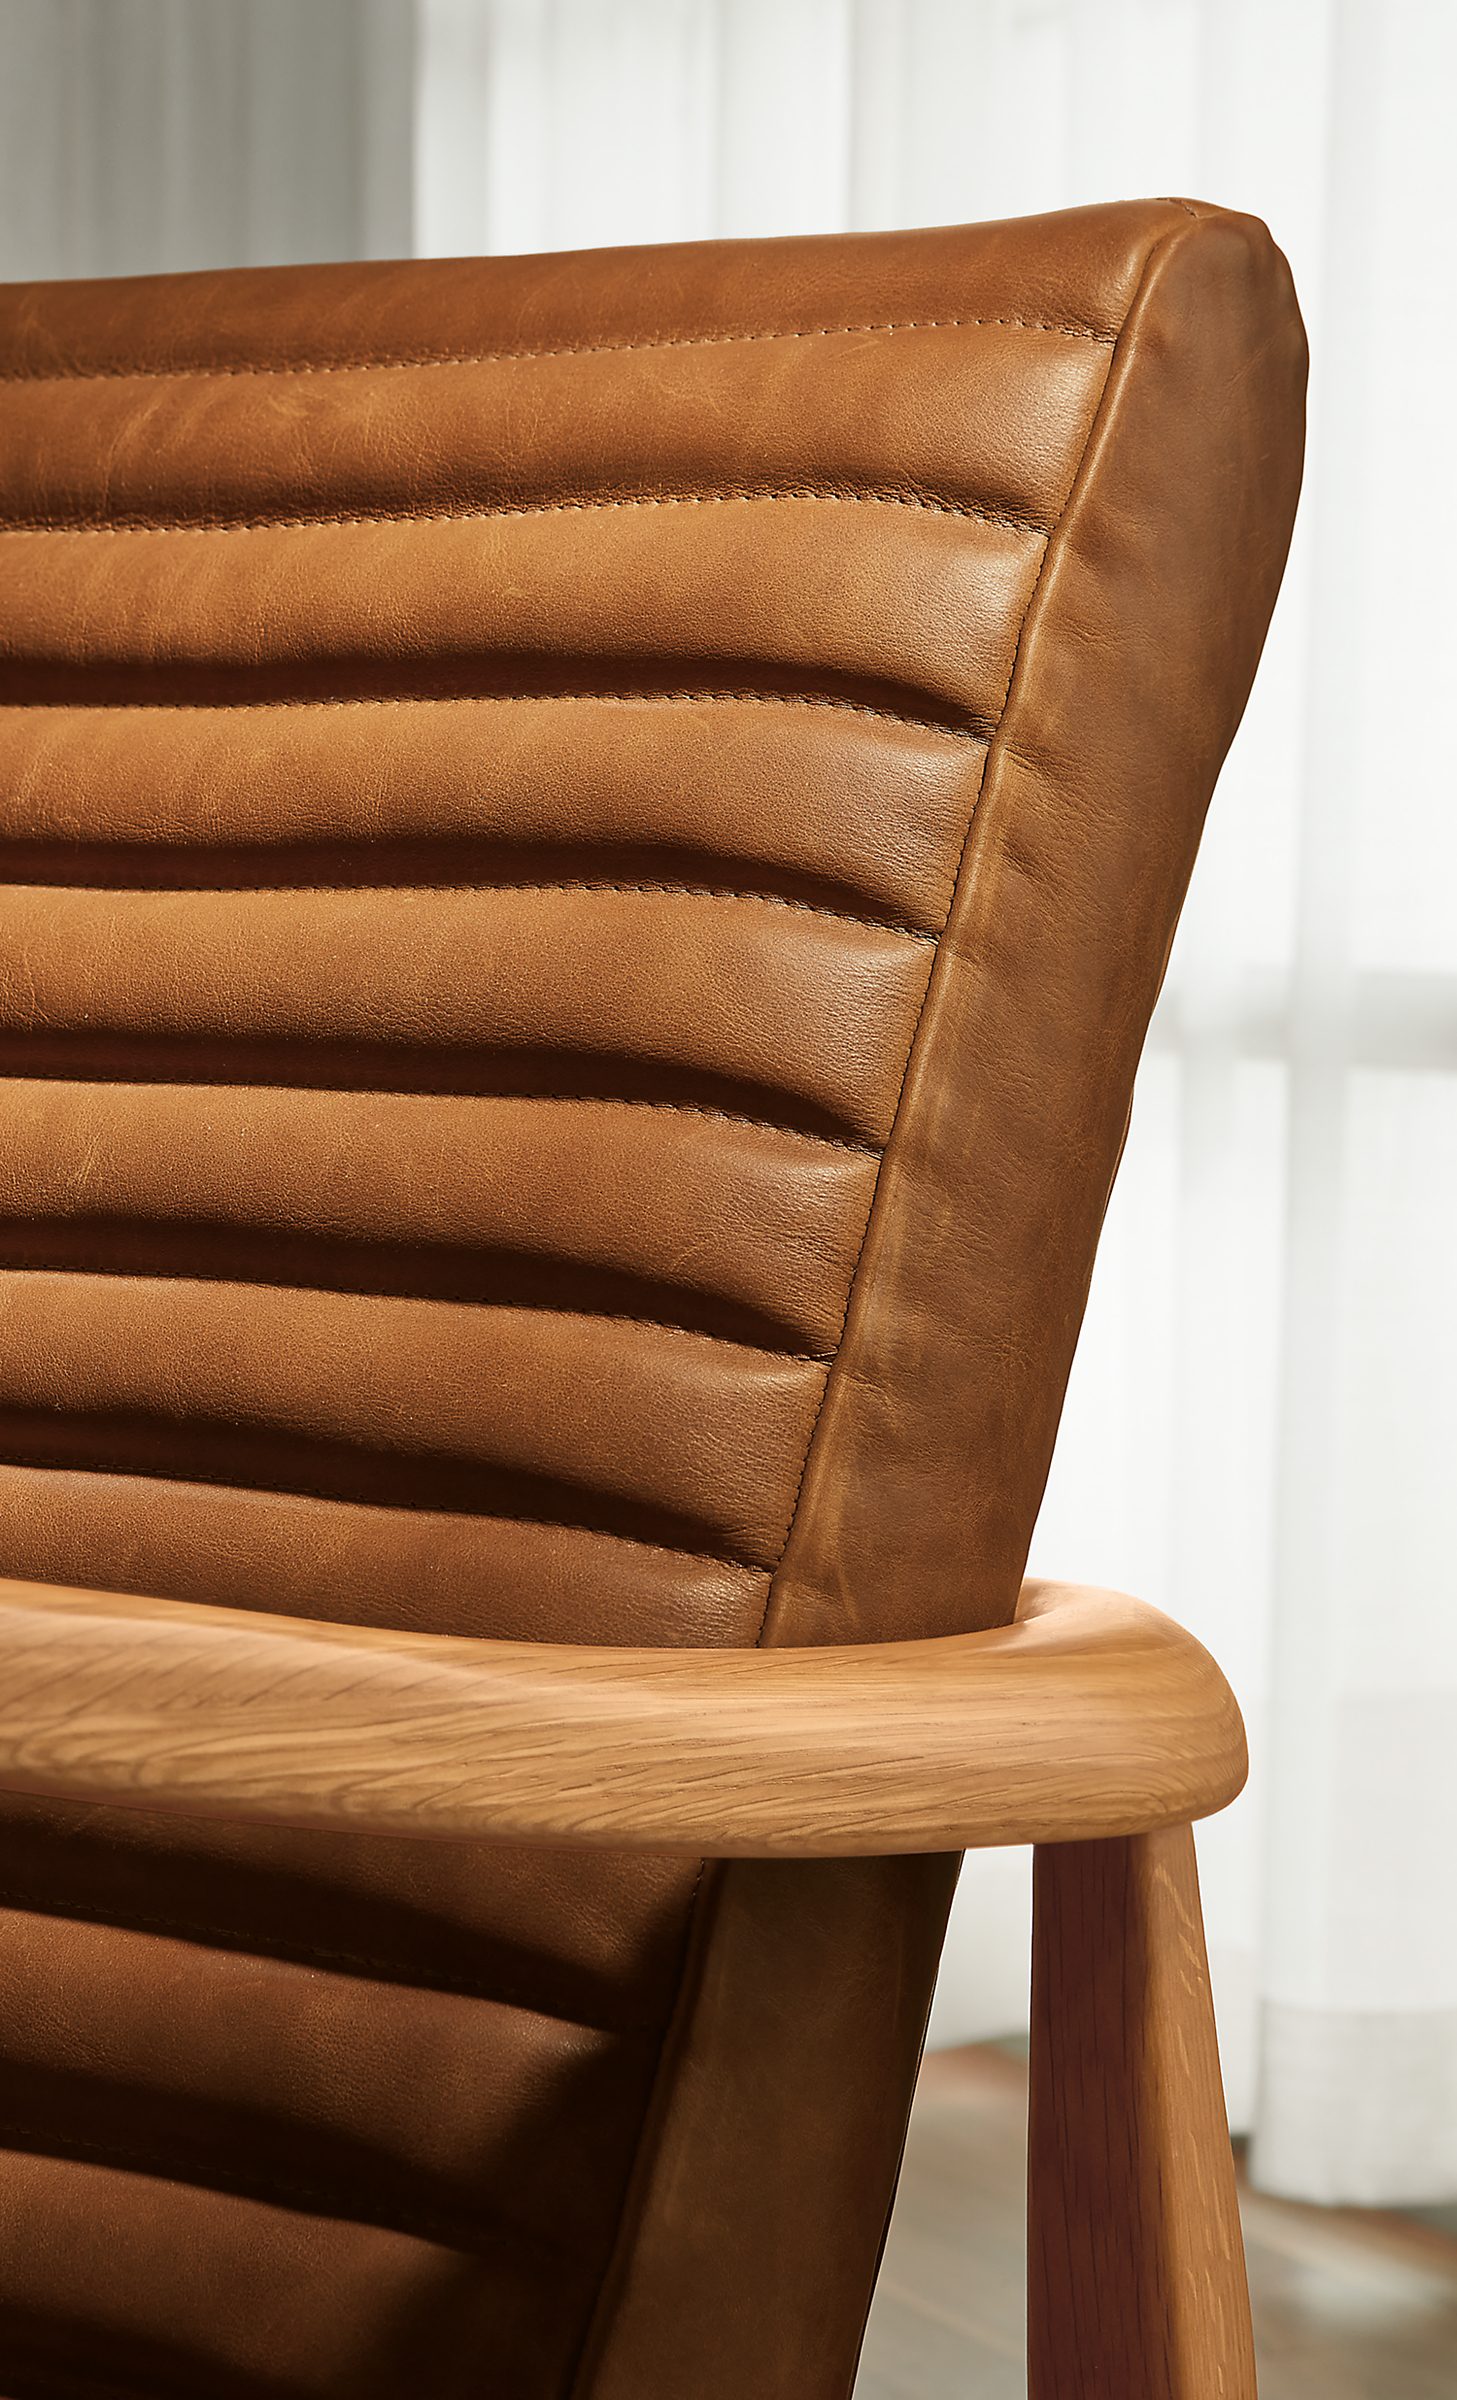 Close detail of Callan Chair in Cyrus Pecan leather and White oak.